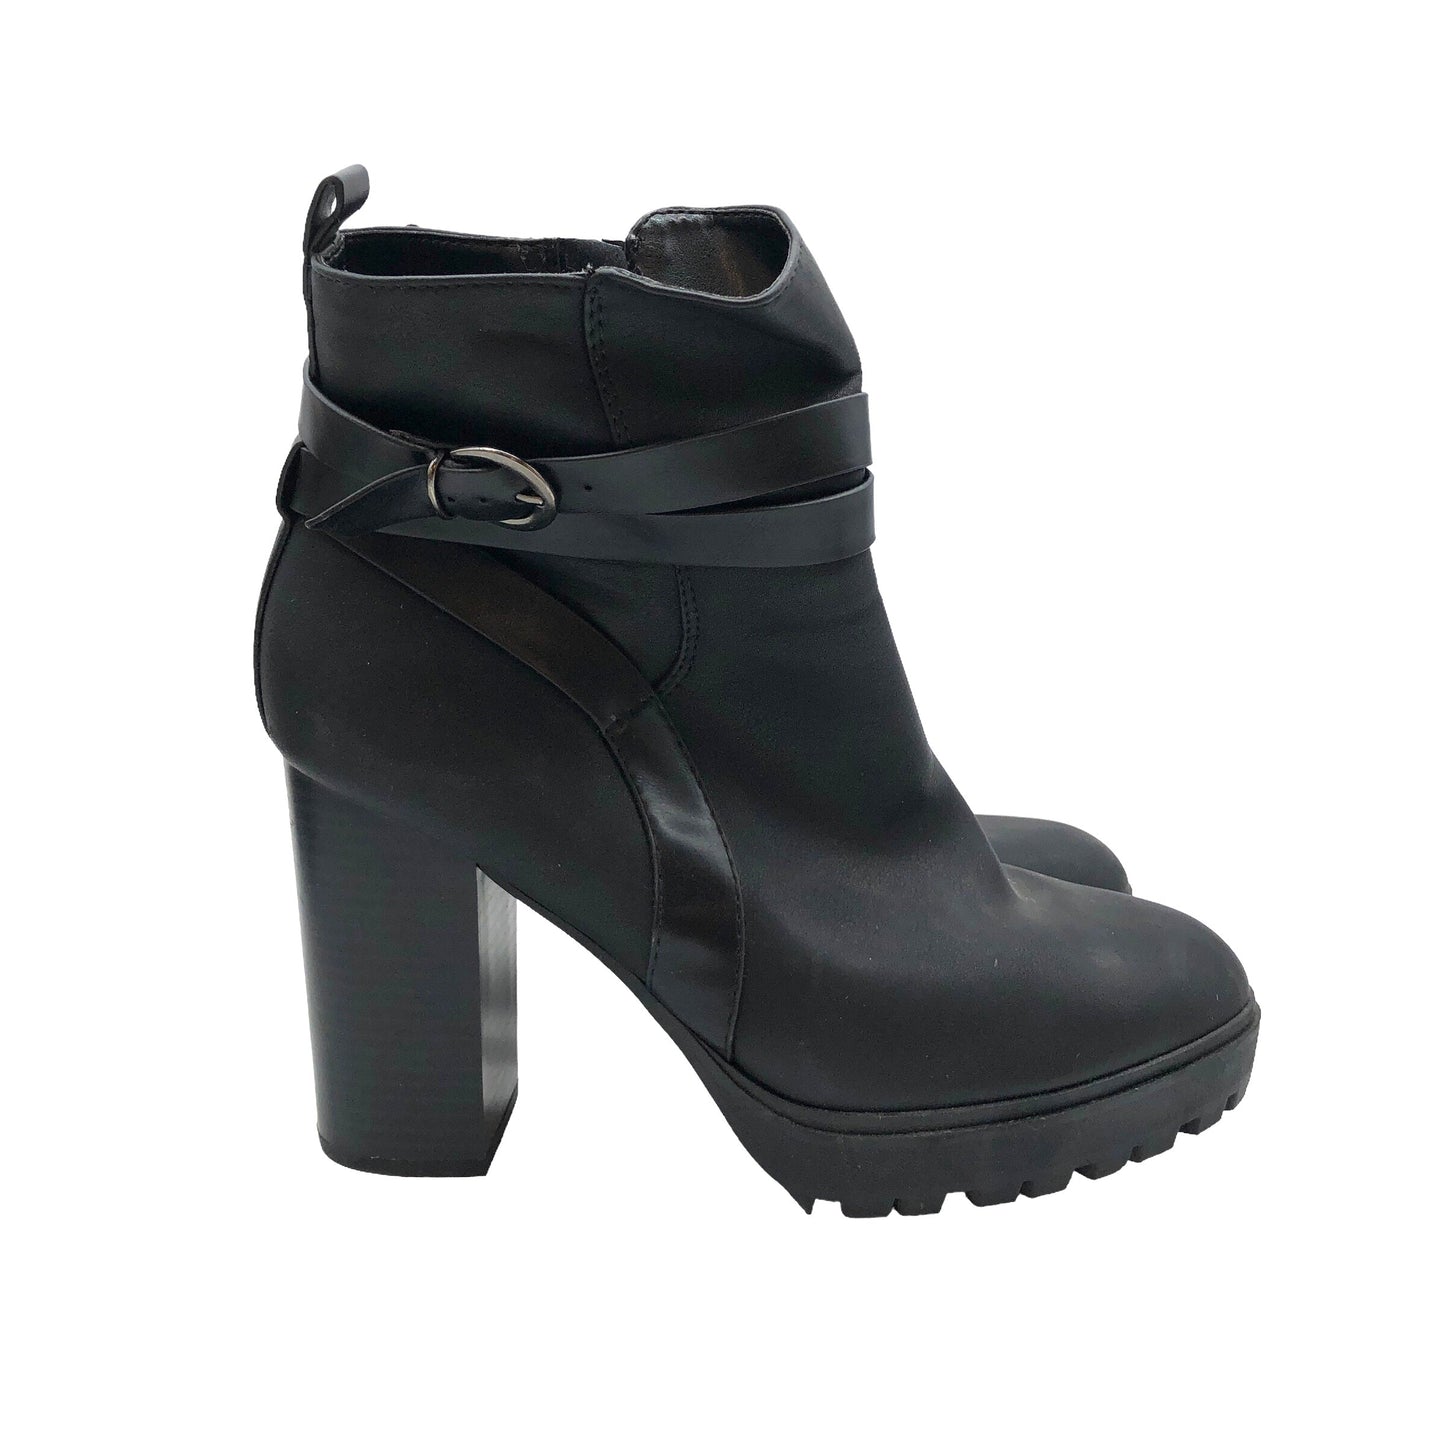 Black Boots Ankle Heels City Classified, Size 10